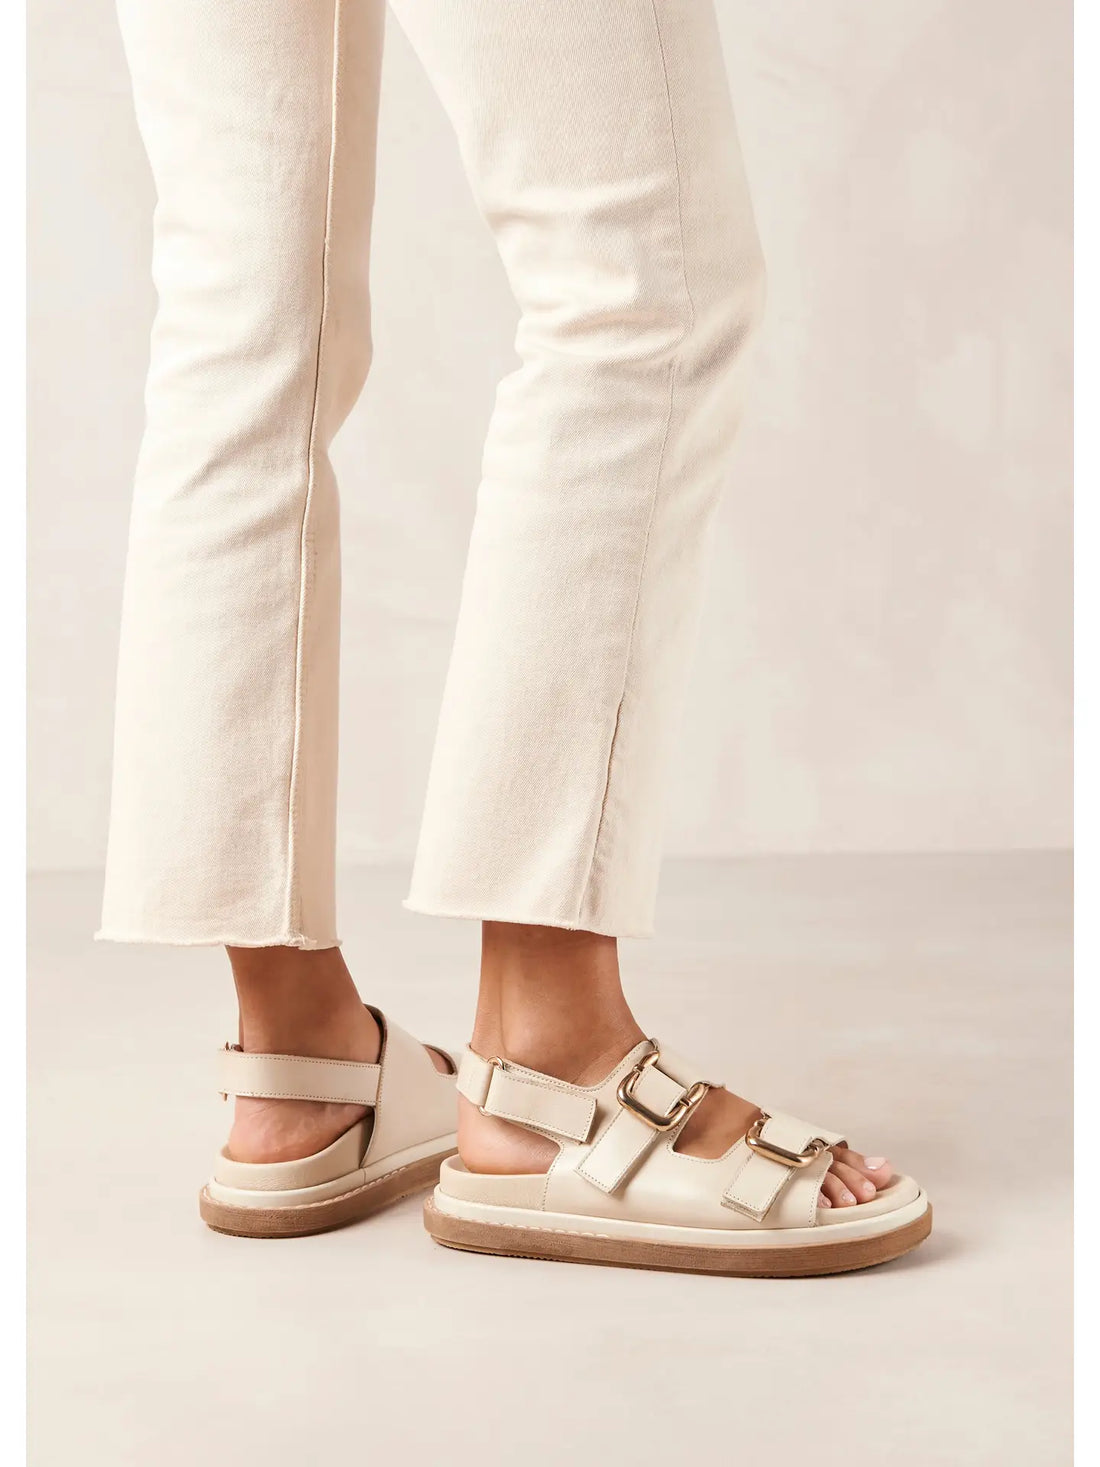 ALOHAS handcrafted, unisex harper sandals in cream leather with gold buckle details